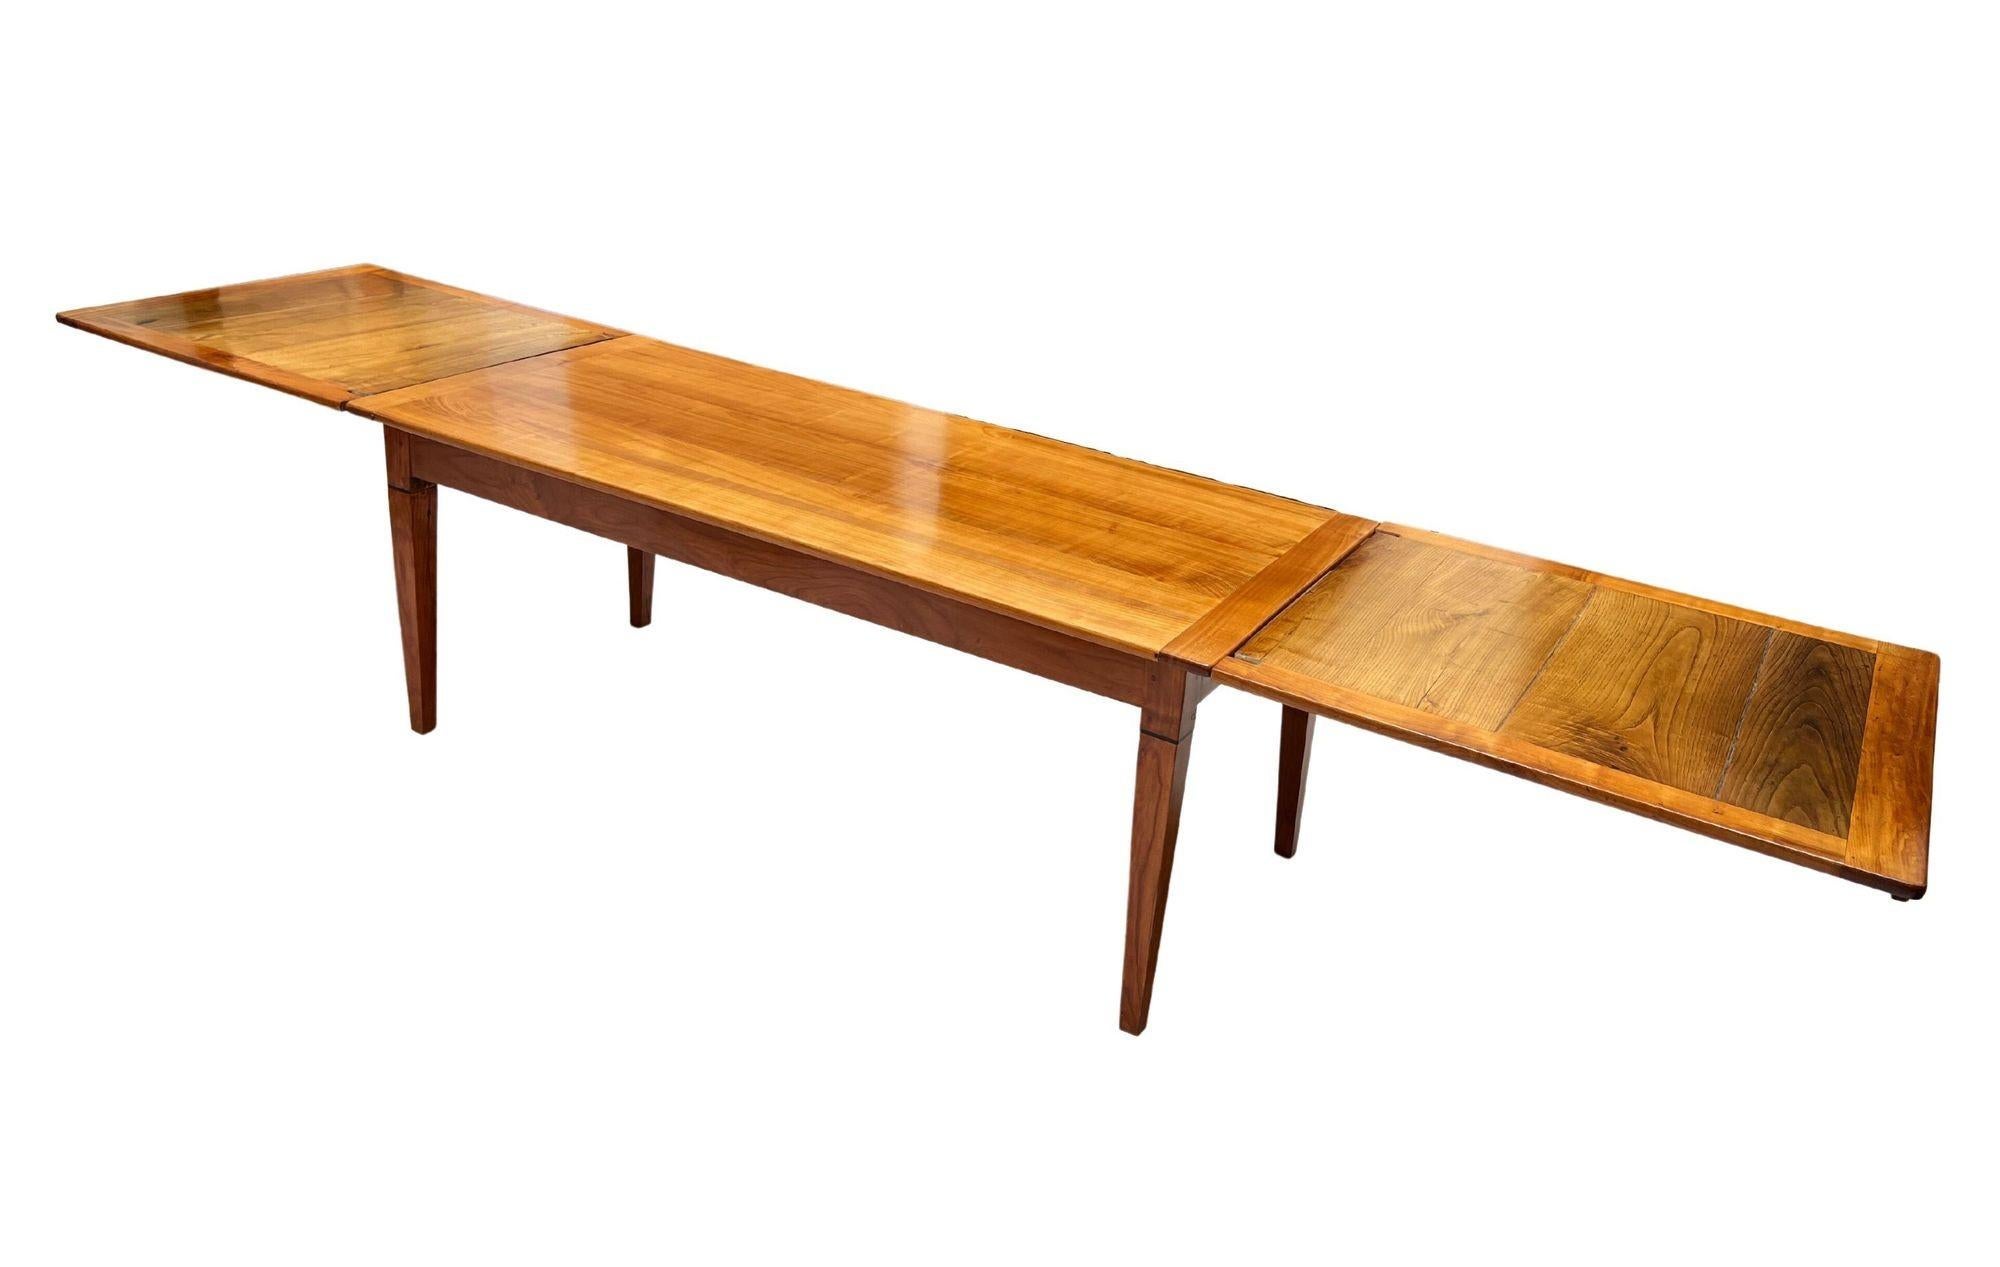 Large rectangular neoclassical Biedermeier (French Restoration) extending / expandable Dining Room Table.
Expandable up to 4 meter / 13.12 feet.
Beautifully solid cherry wood, hand-polished with shellac (french polish). Two extension leaves a 100 cm